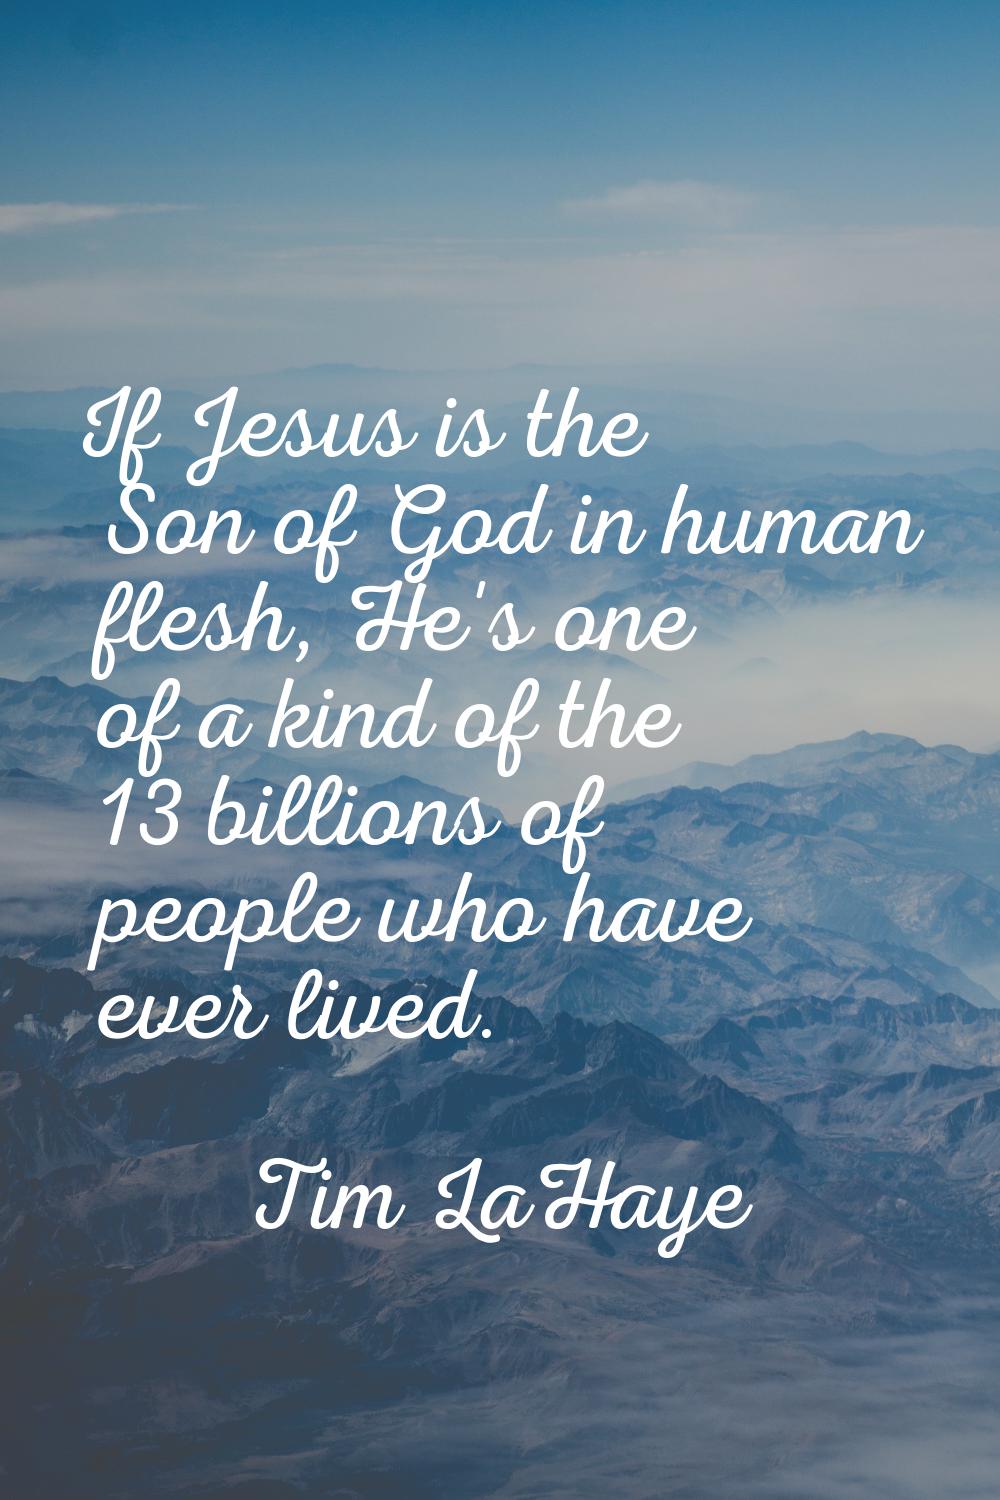 If Jesus is the Son of God in human flesh, He's one of a kind of the 13 billions of people who have